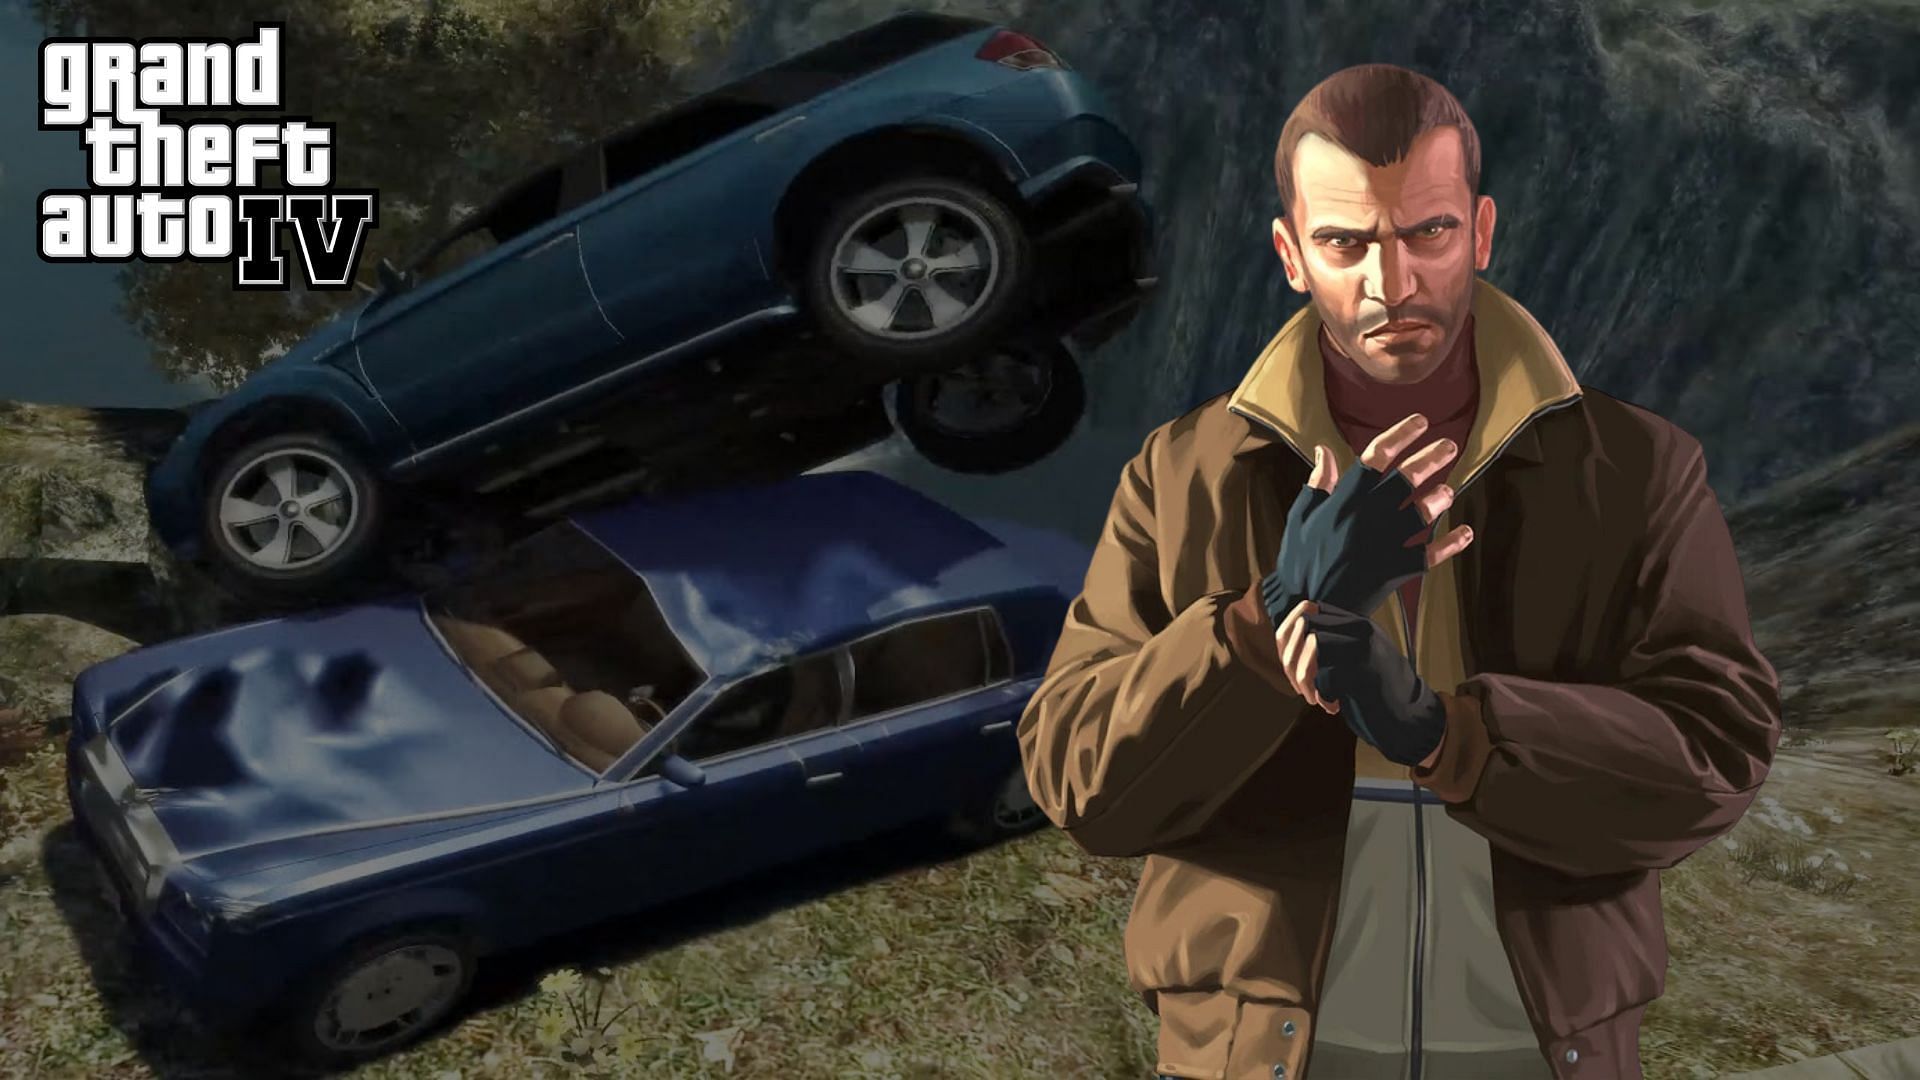 5 mind-blowing features in GTA 4 that Rockstar should bring back